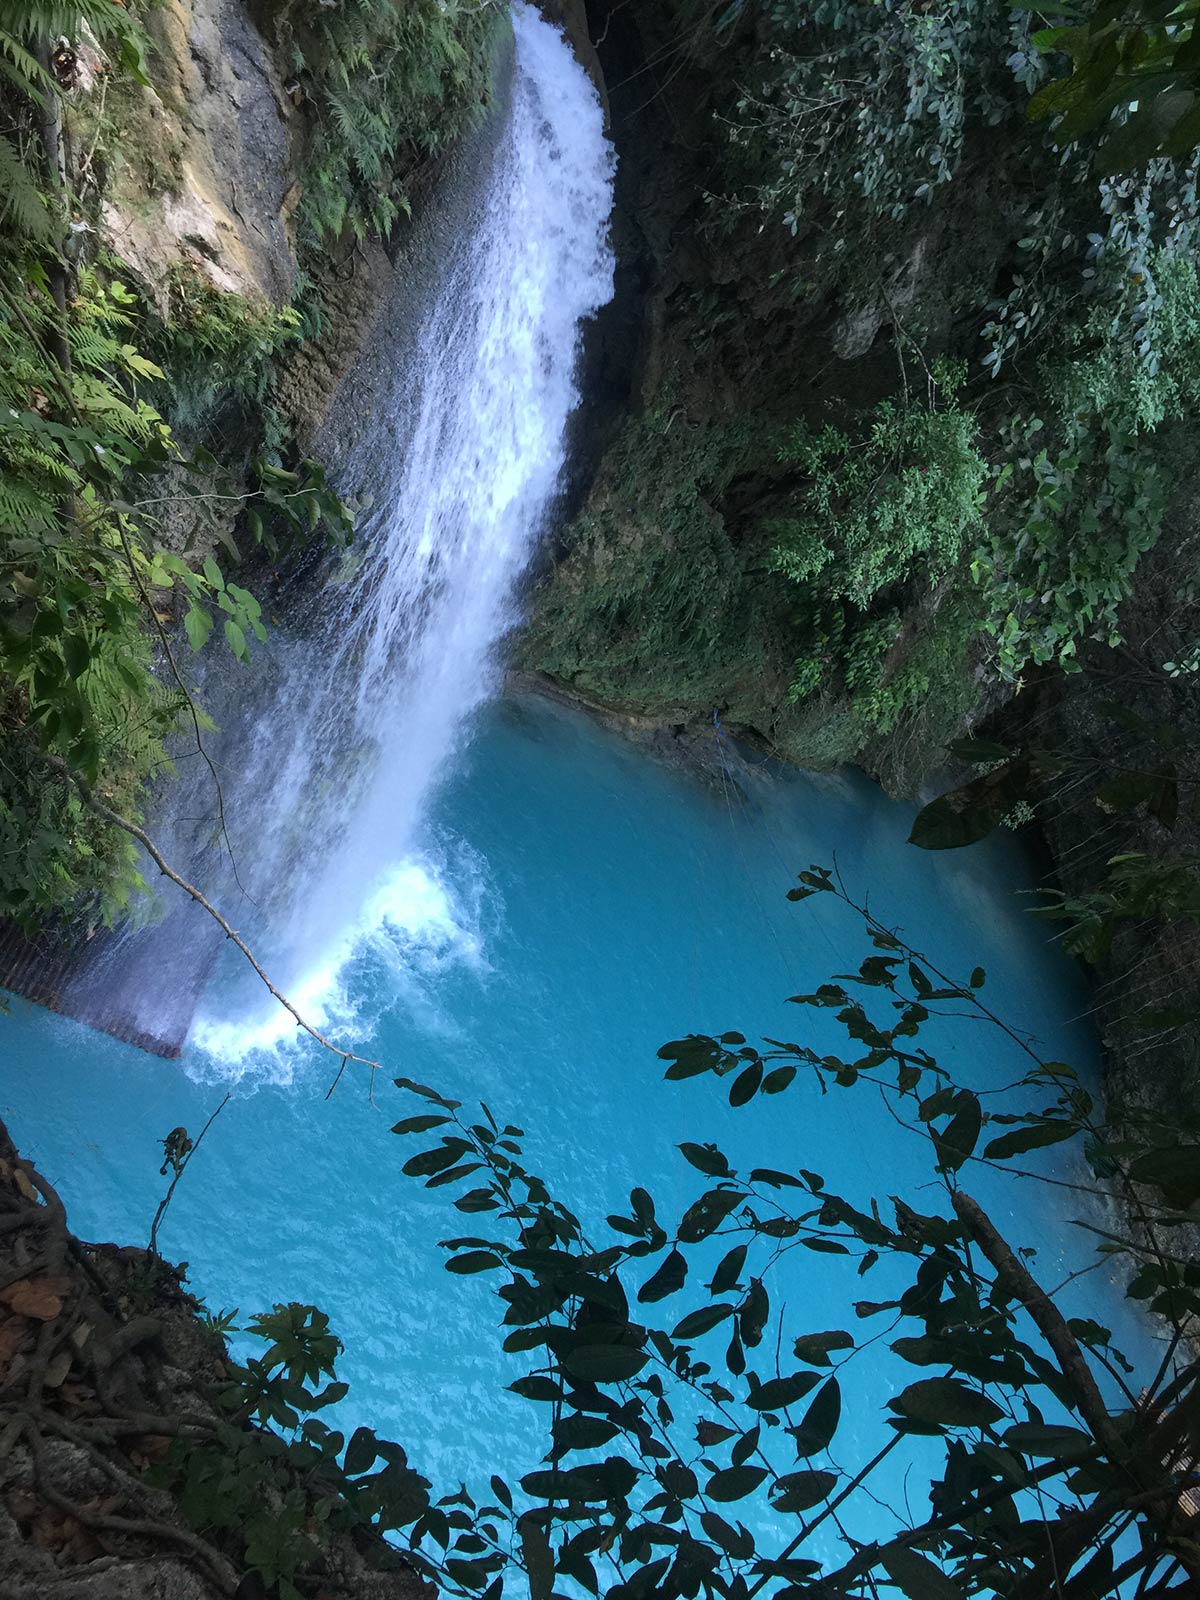 Waterfall with blue waters in Moalboal, Philippines. Canyoneering in Moalboal